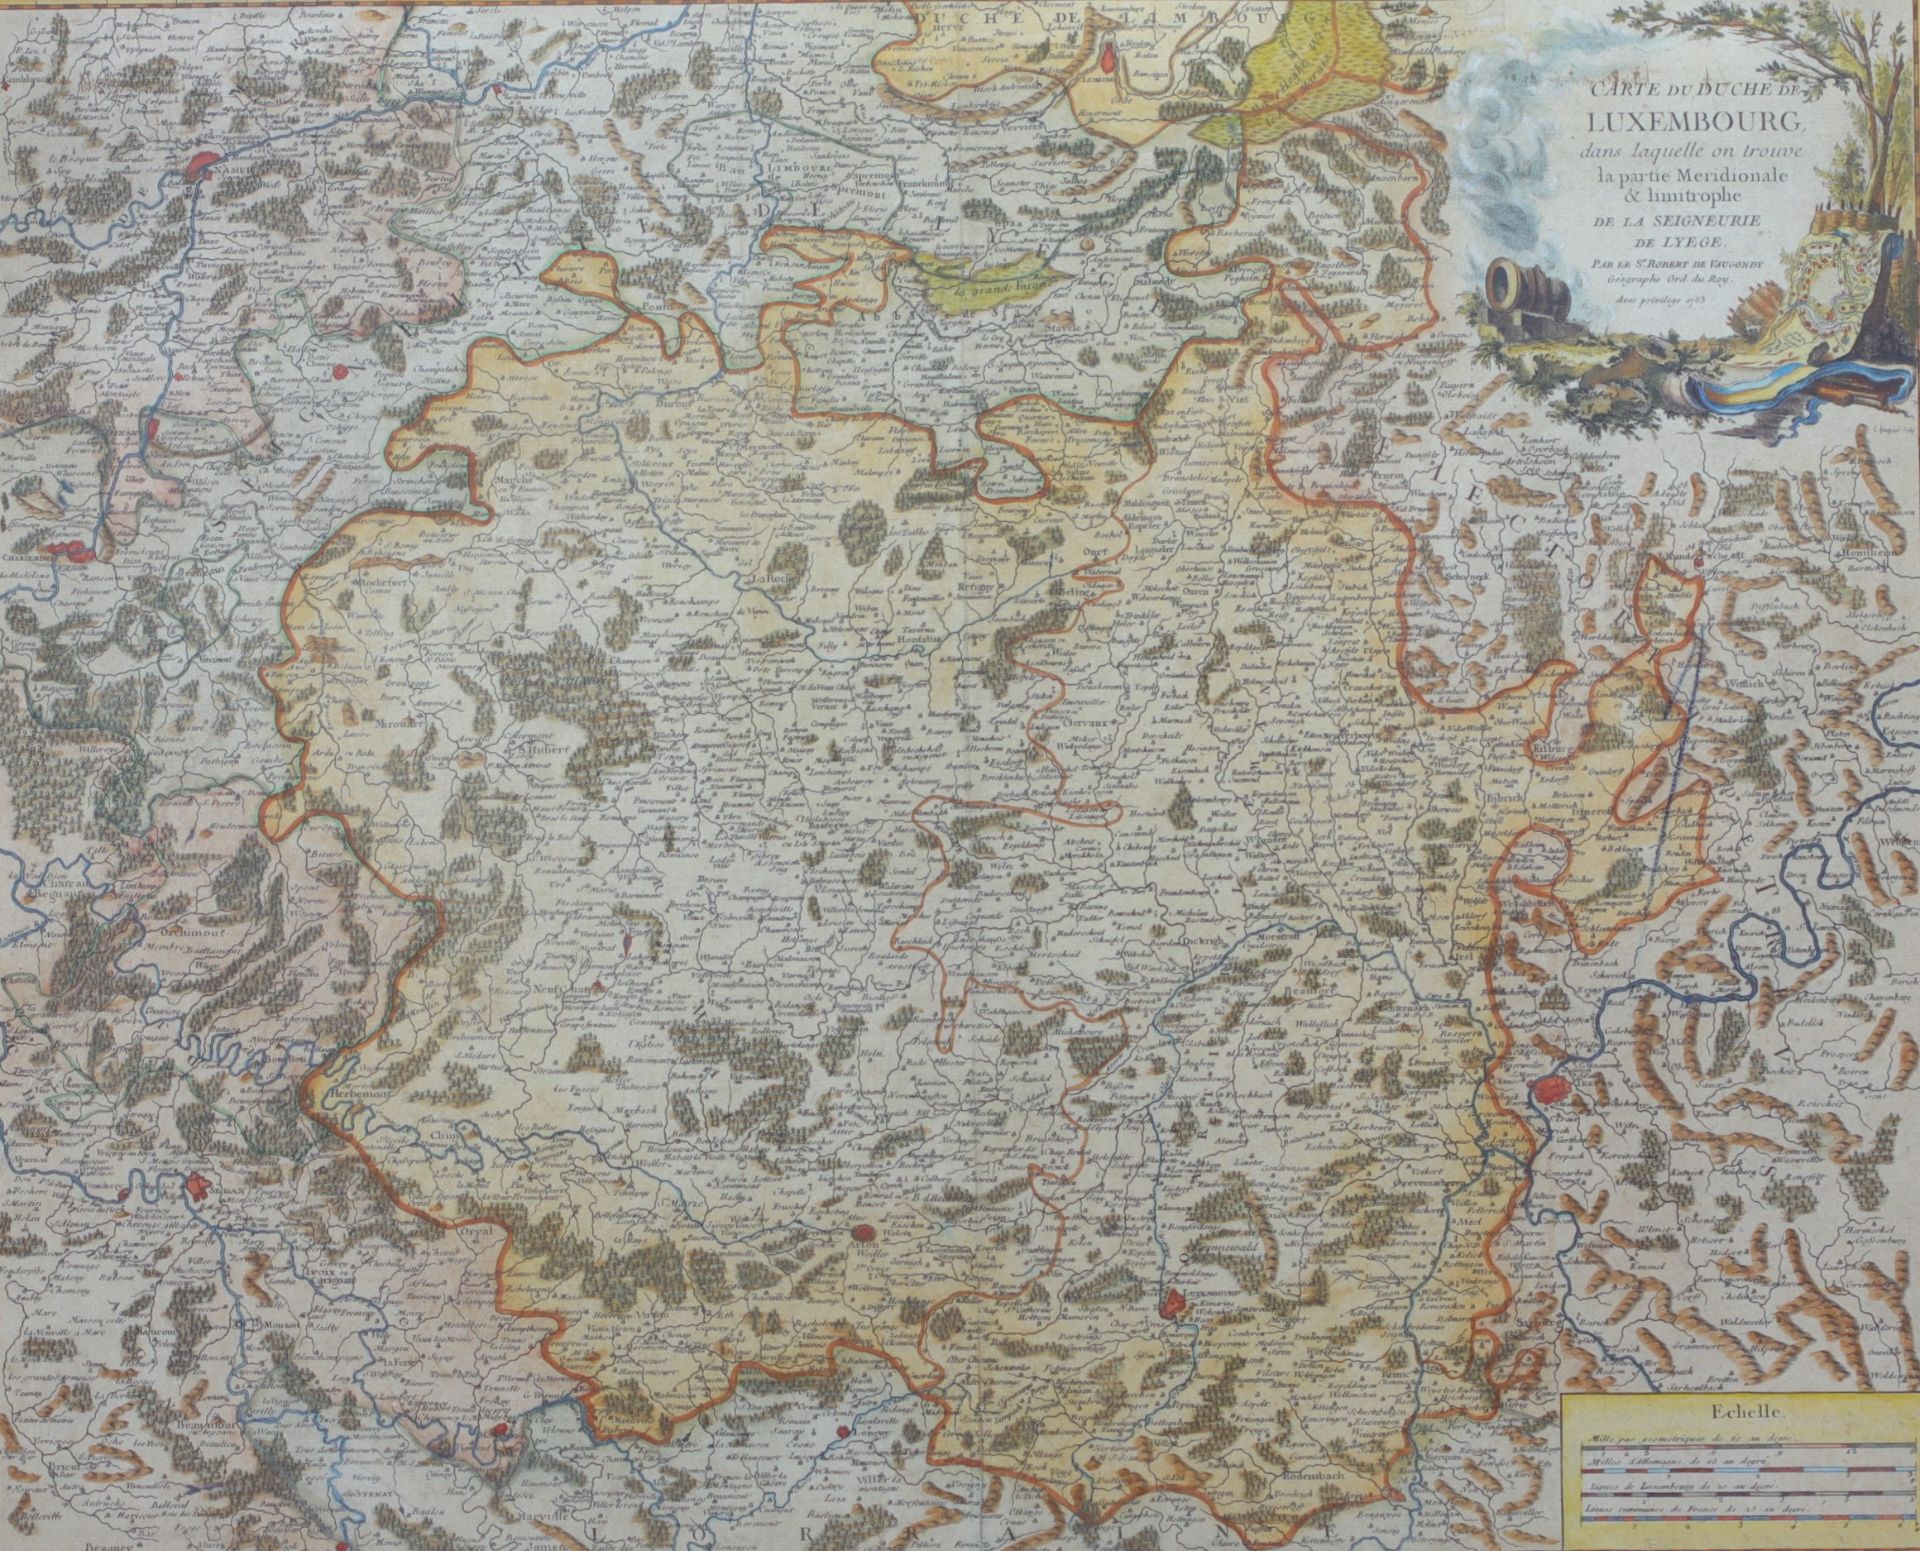 Old map of the Grand Duchy of Luxembourg from 1753